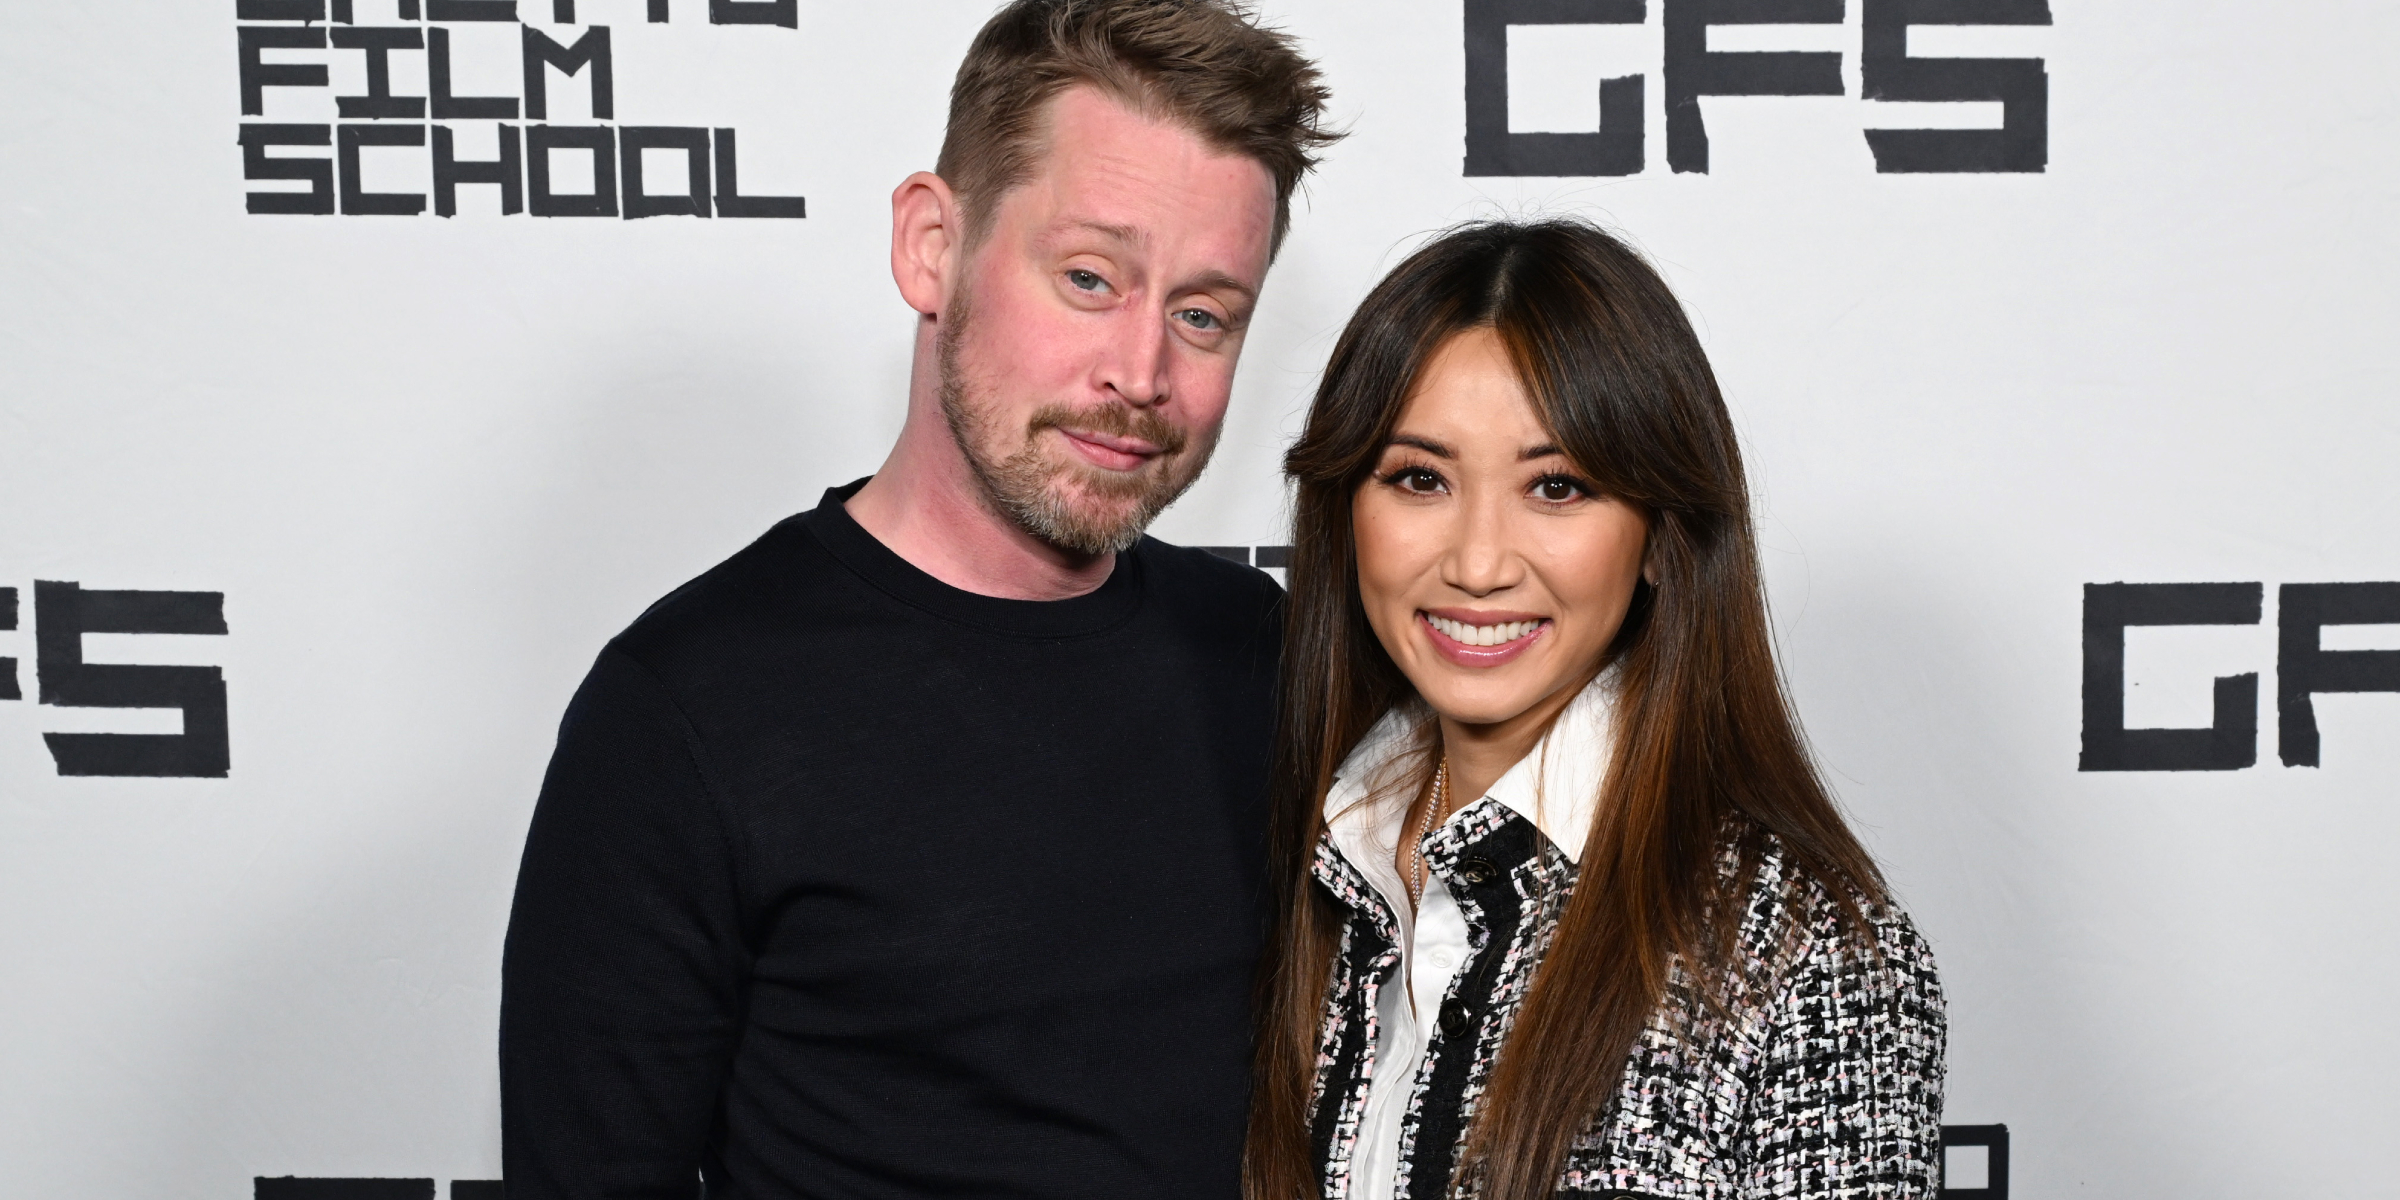 Macaulay Culkin and Brenda Song | Source: Getty Images